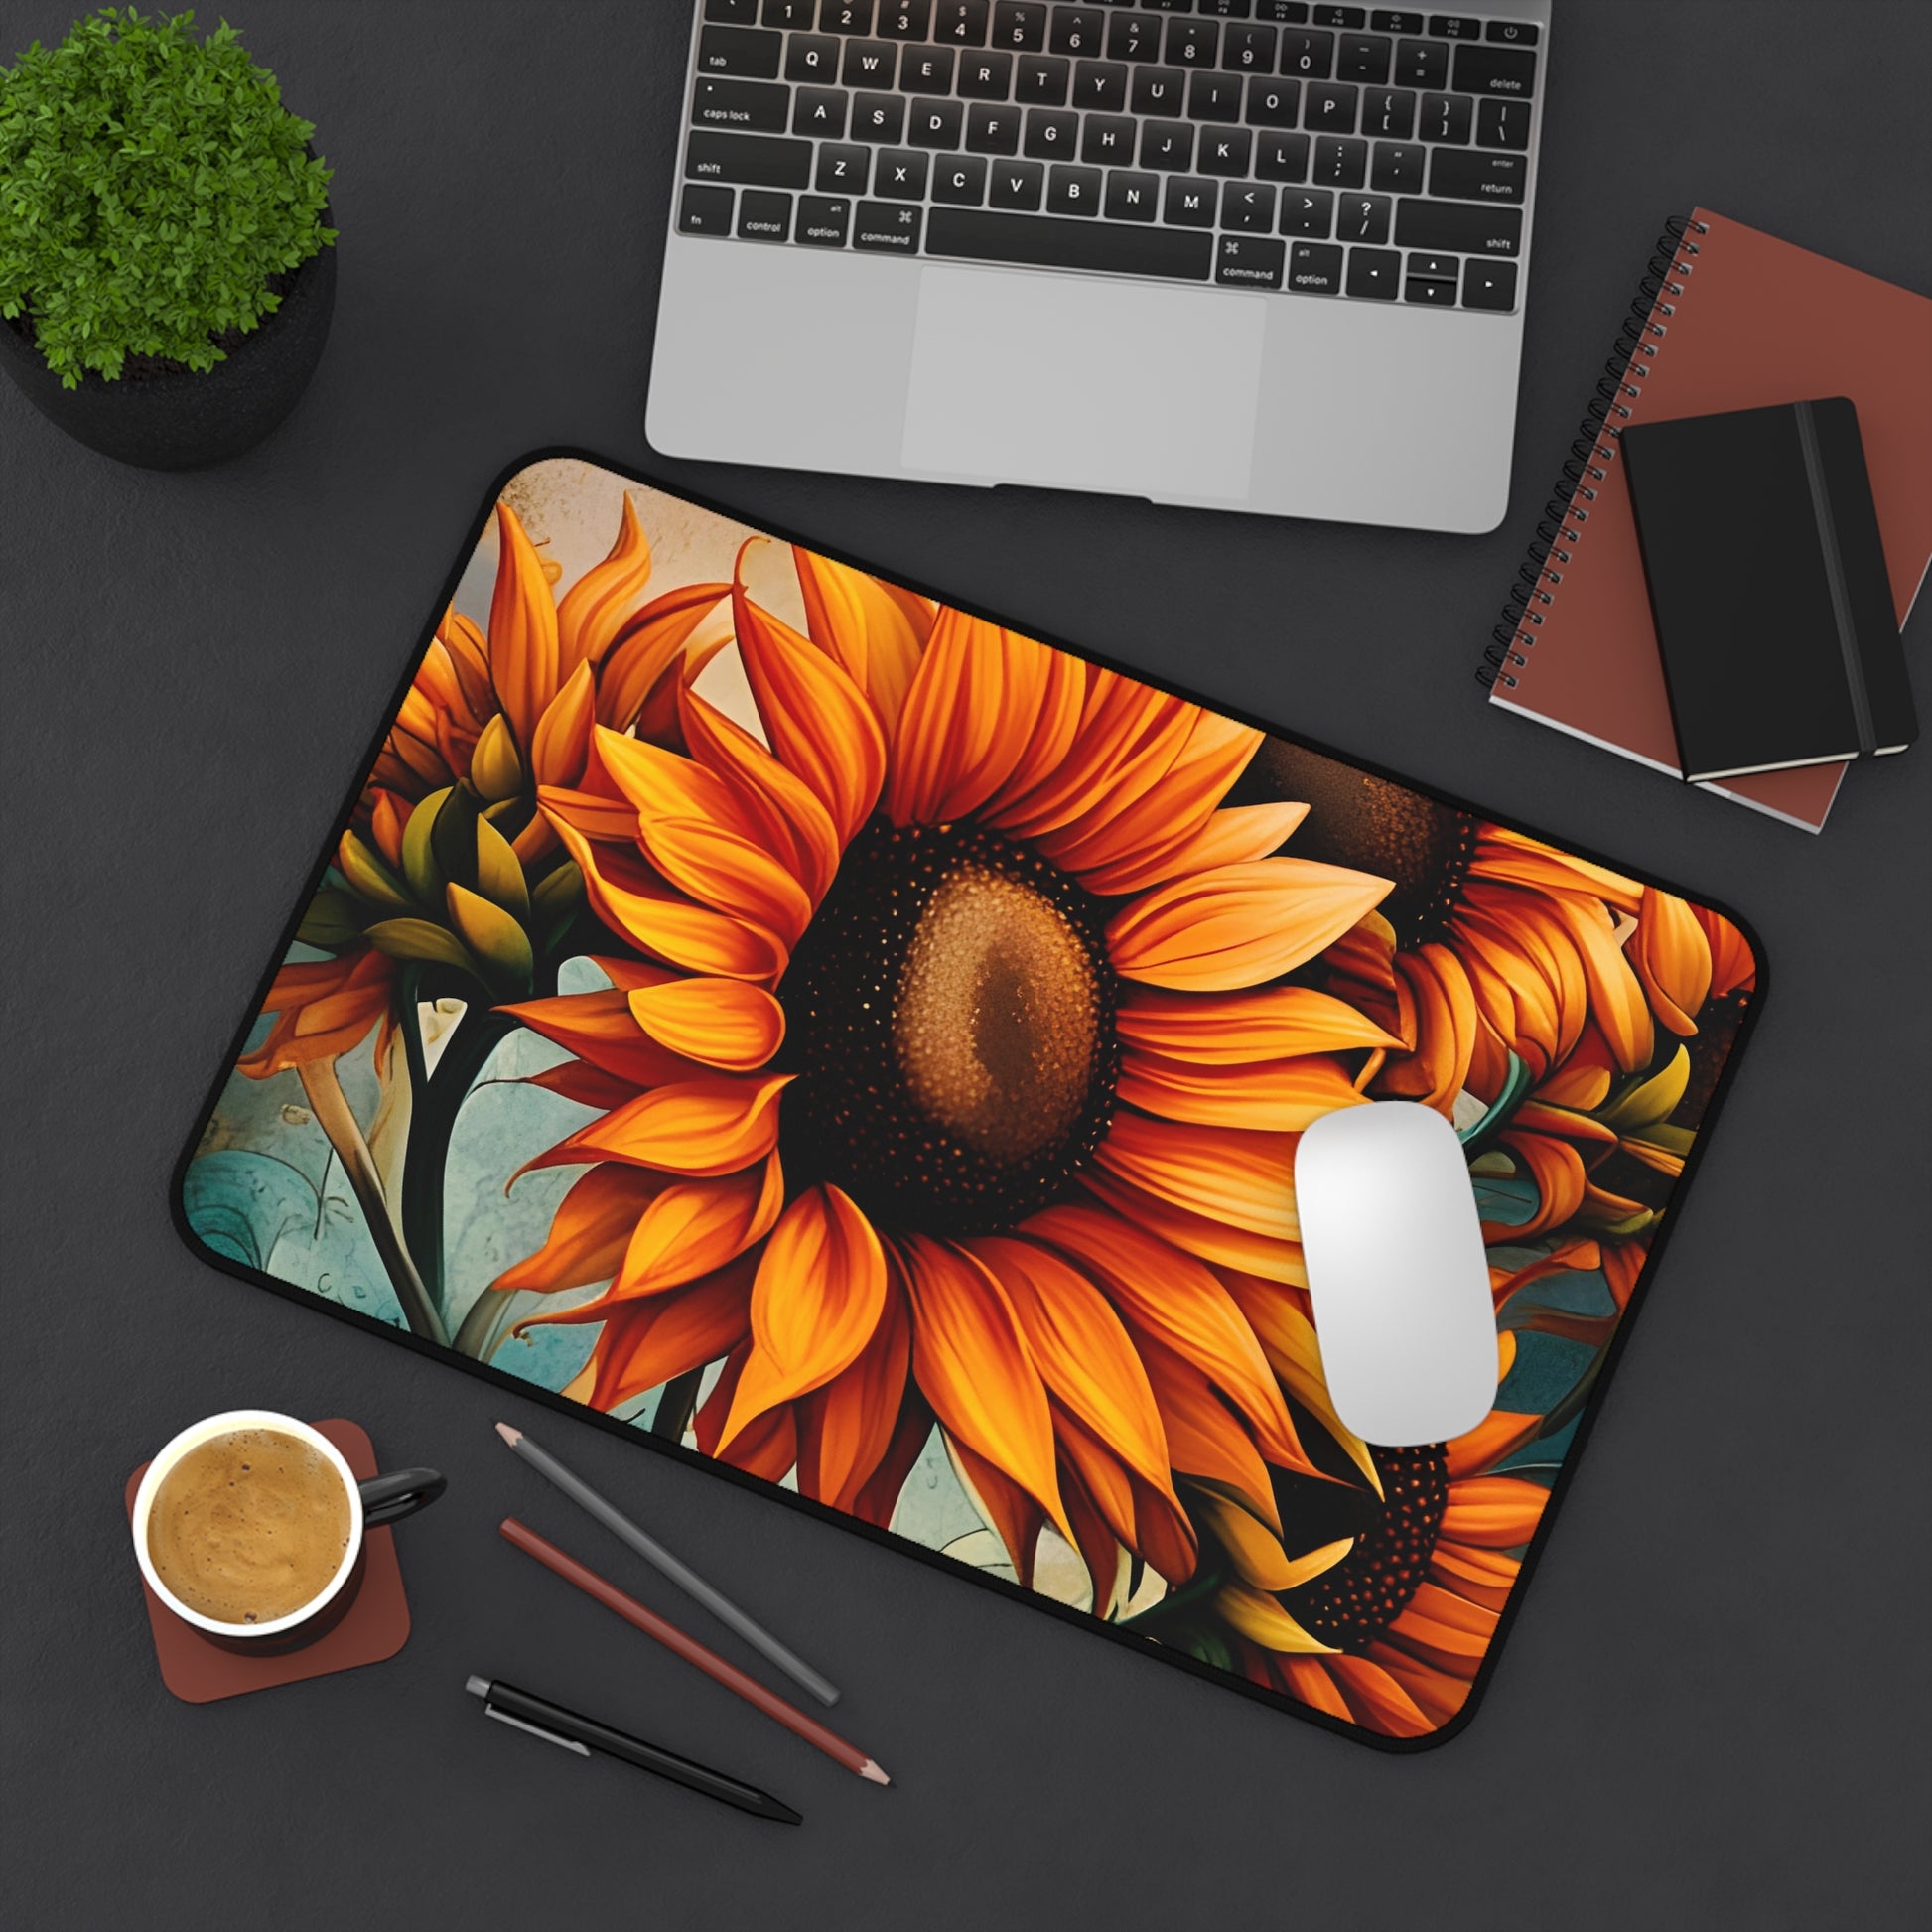 Sunflower Crop on Distressed Blue and Copper Background Printed on Desk mat 12x18 on desk